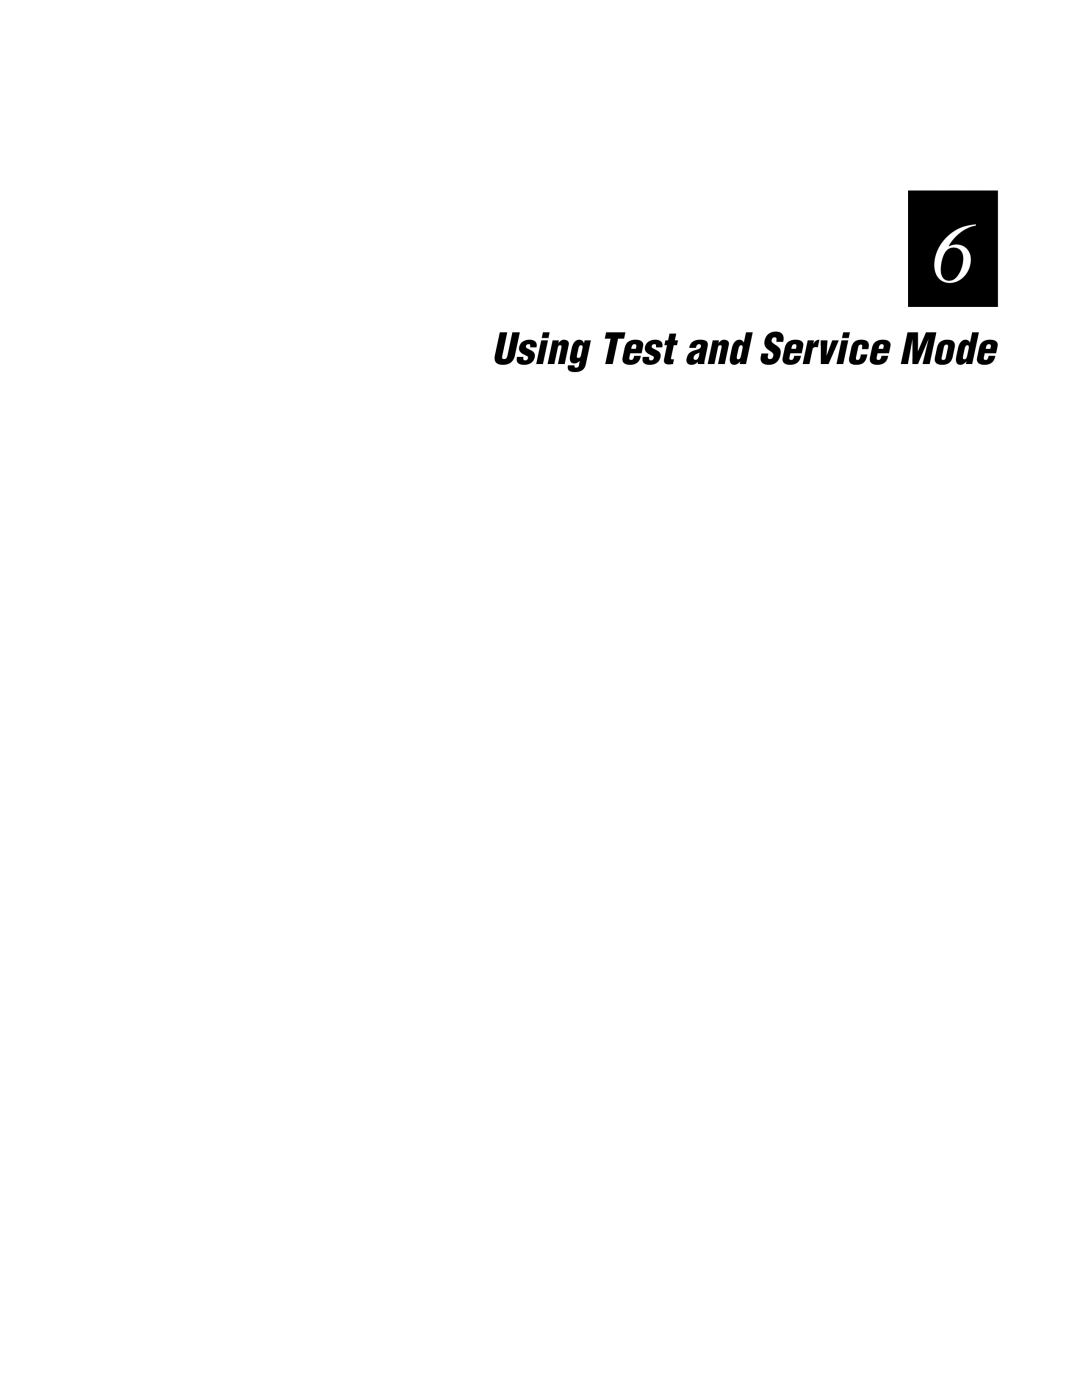 IBM EasyCoder 3400e user manual Using Test and Service Mode 